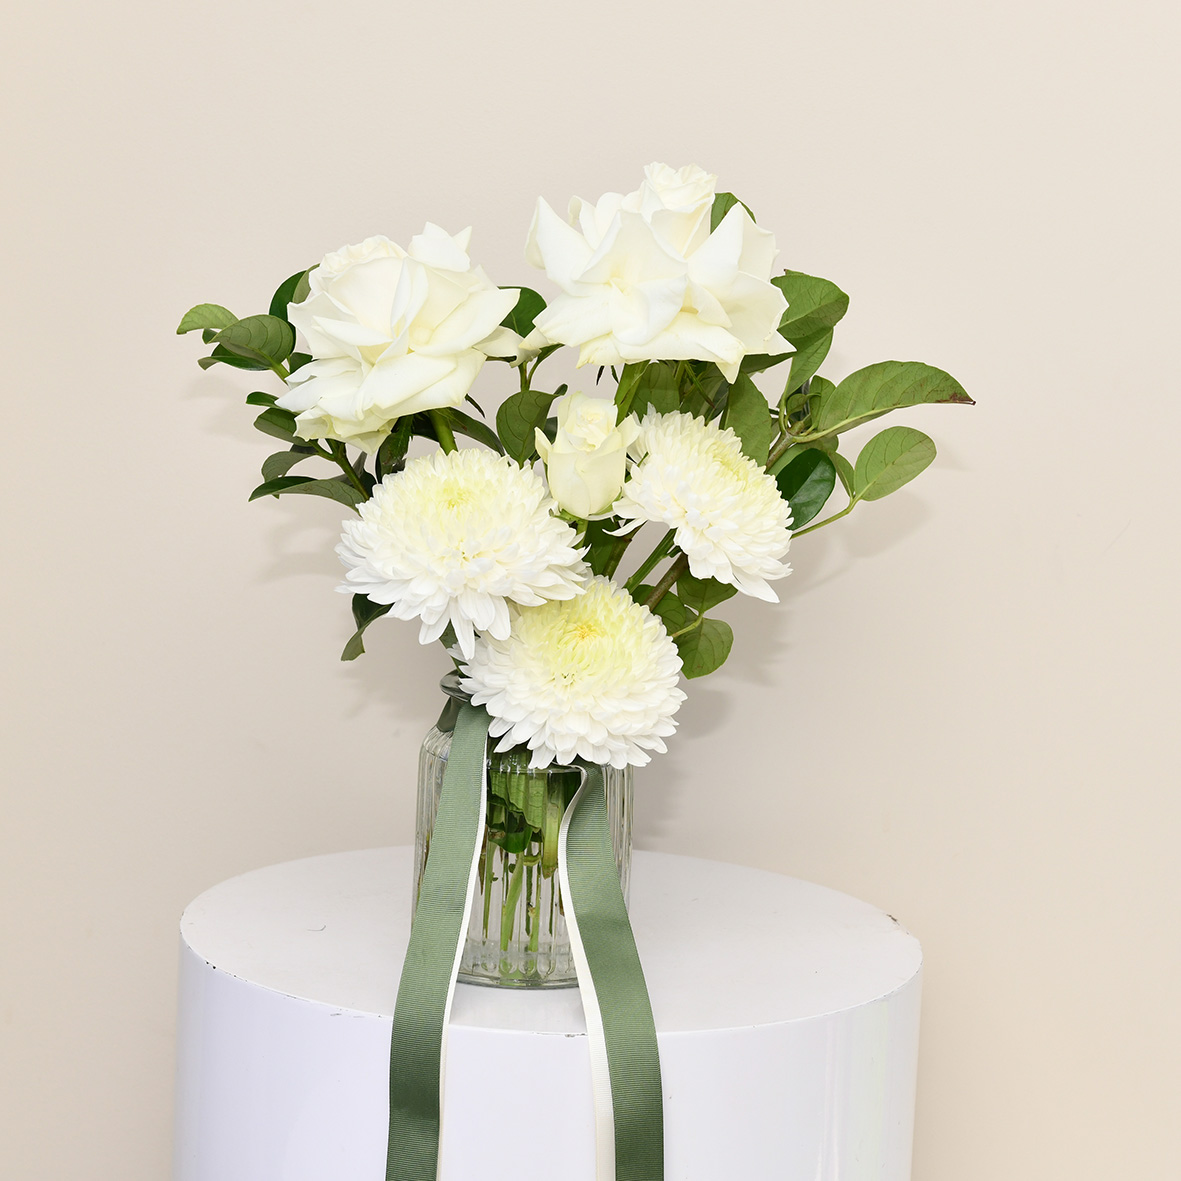 Sympathy flowers - White Blooms in a Jar